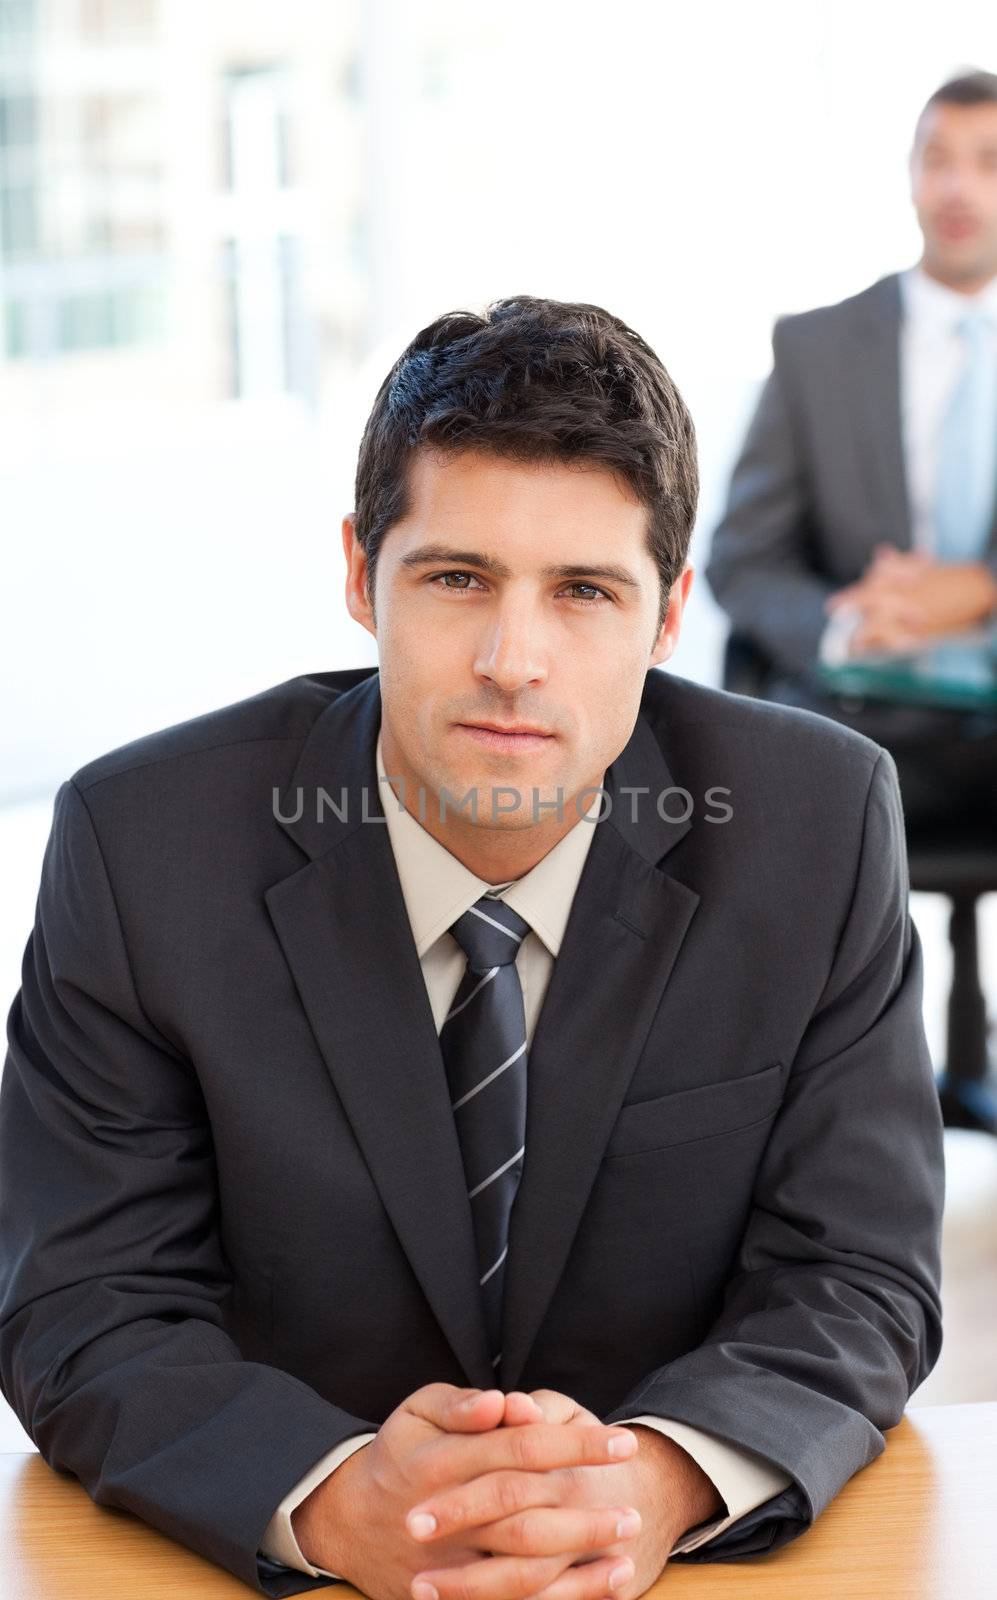 Concentrated businessman during a meeting with a colleague by Wavebreakmedia